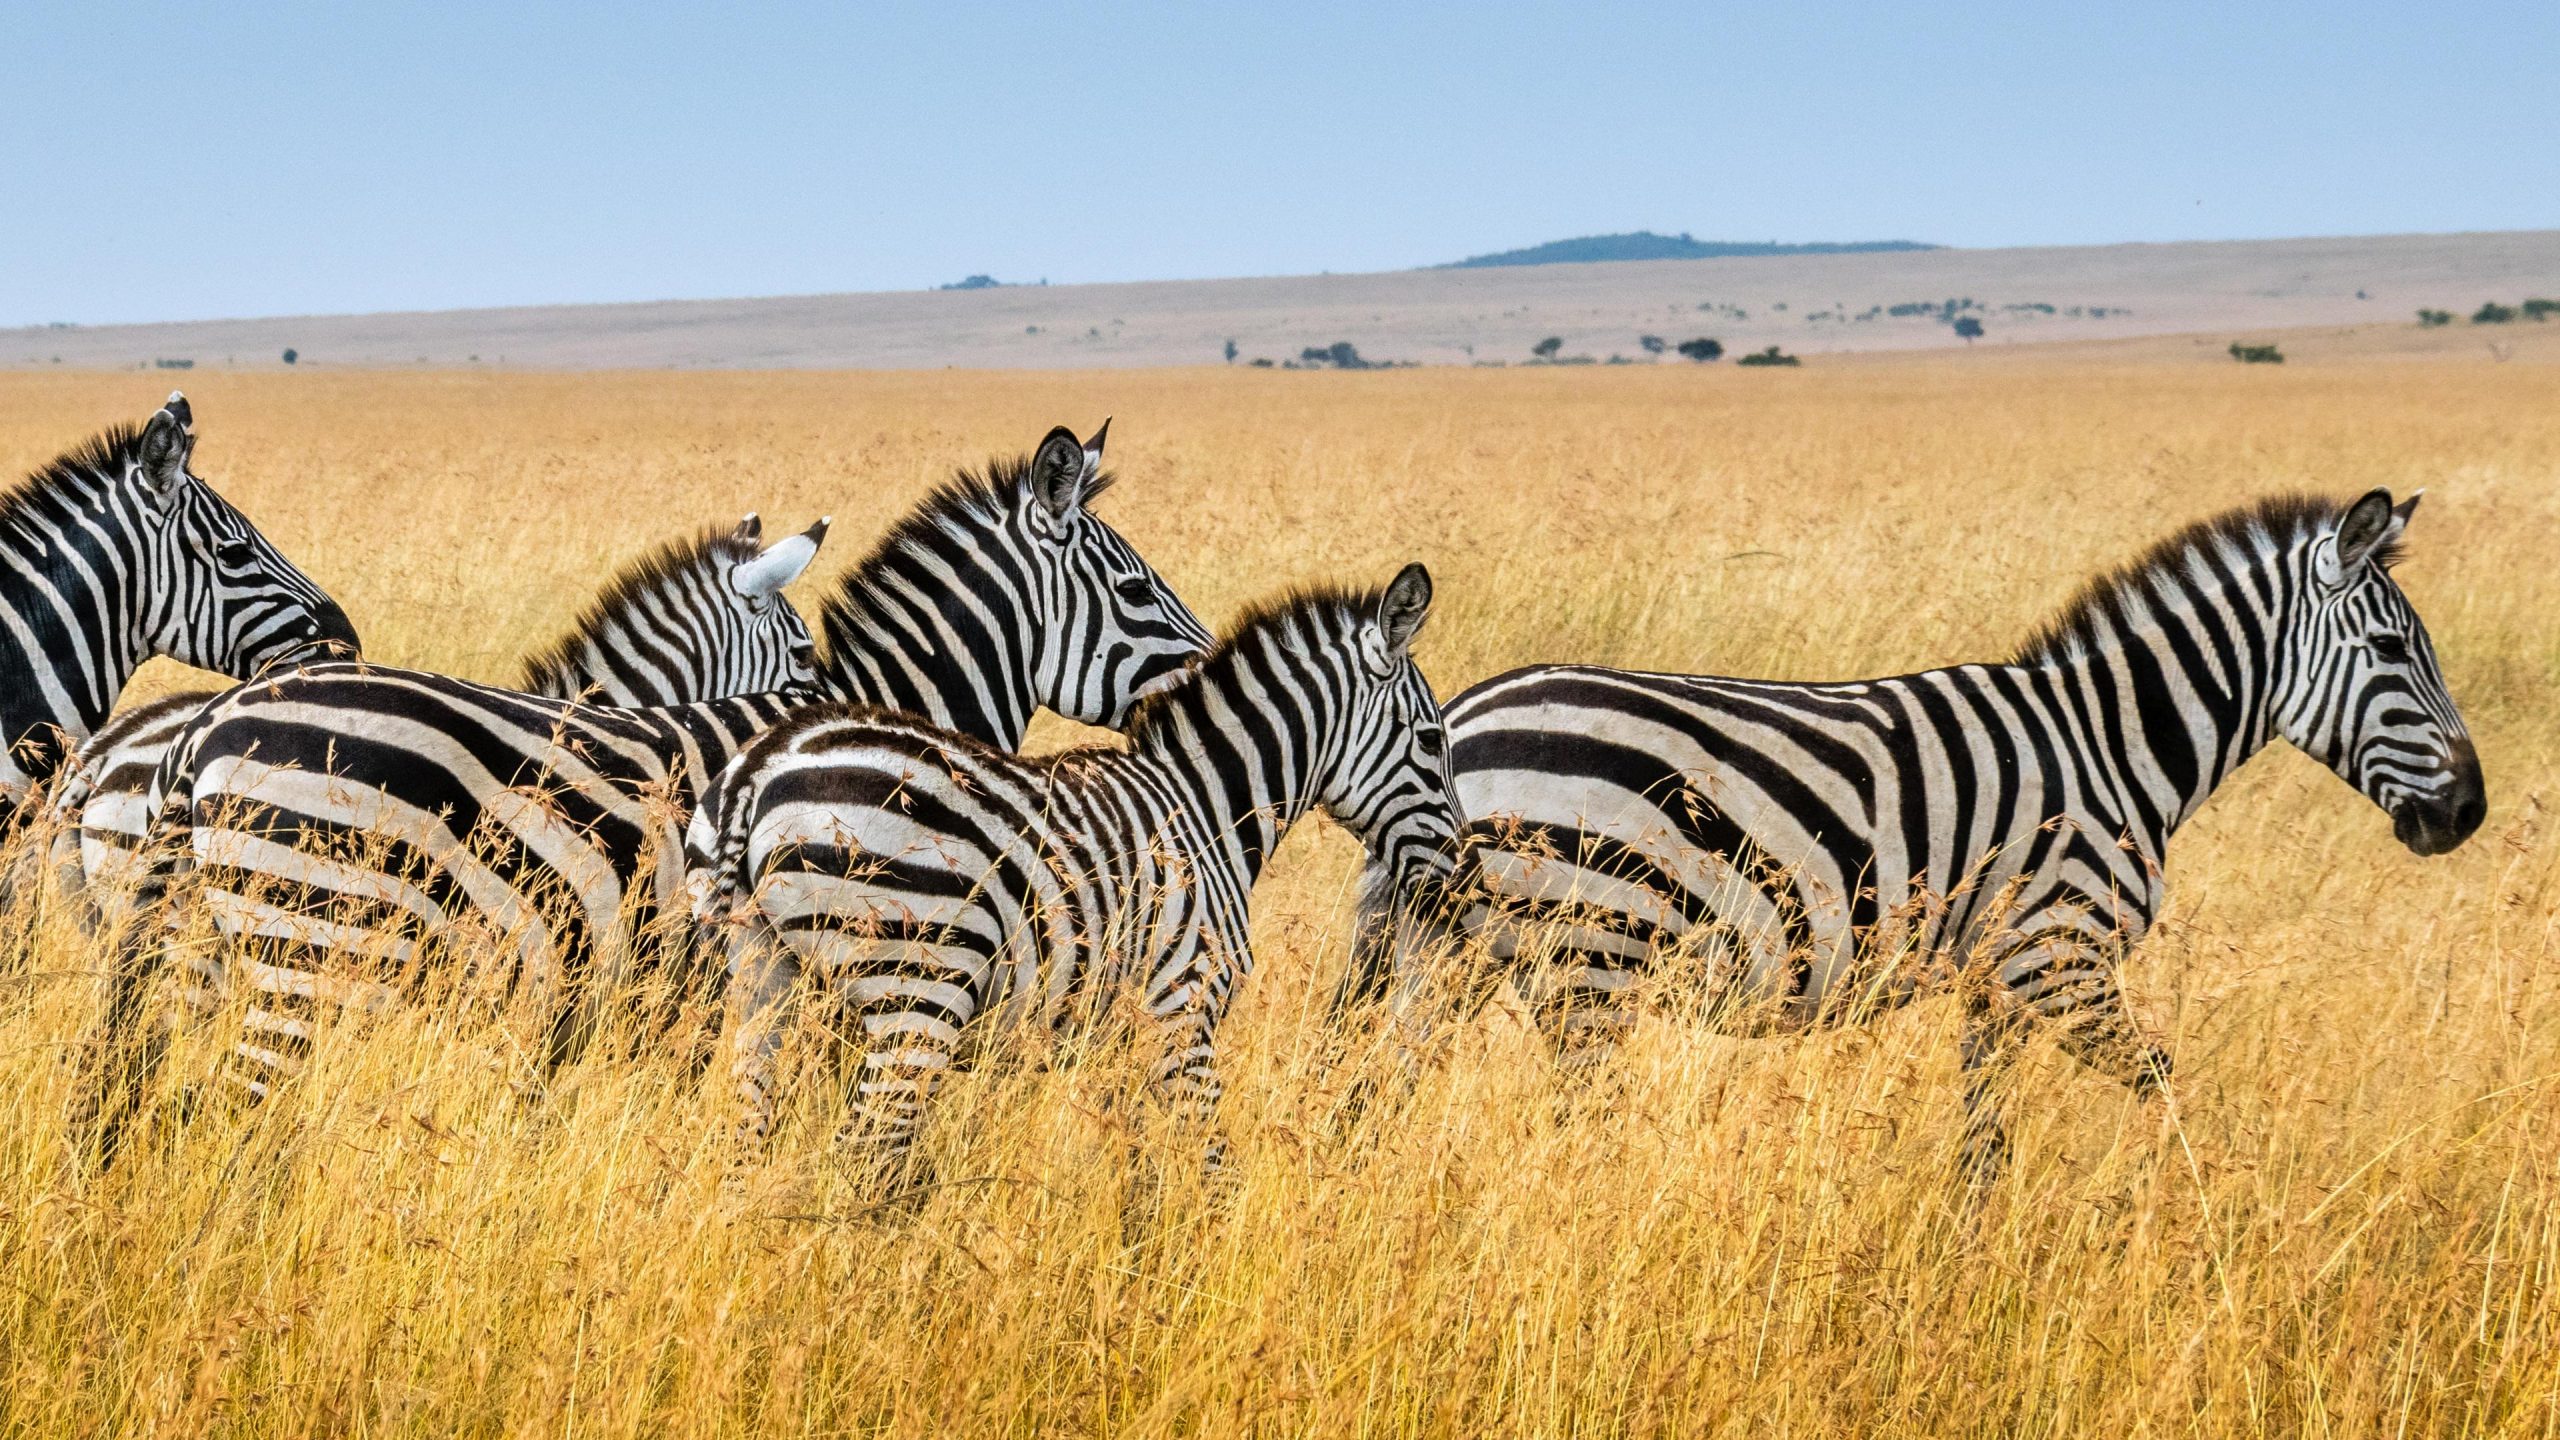 The Mystery of Why Zebras Have Their Stripes Has Baffled Scientists – Now a  Dazzling Answer